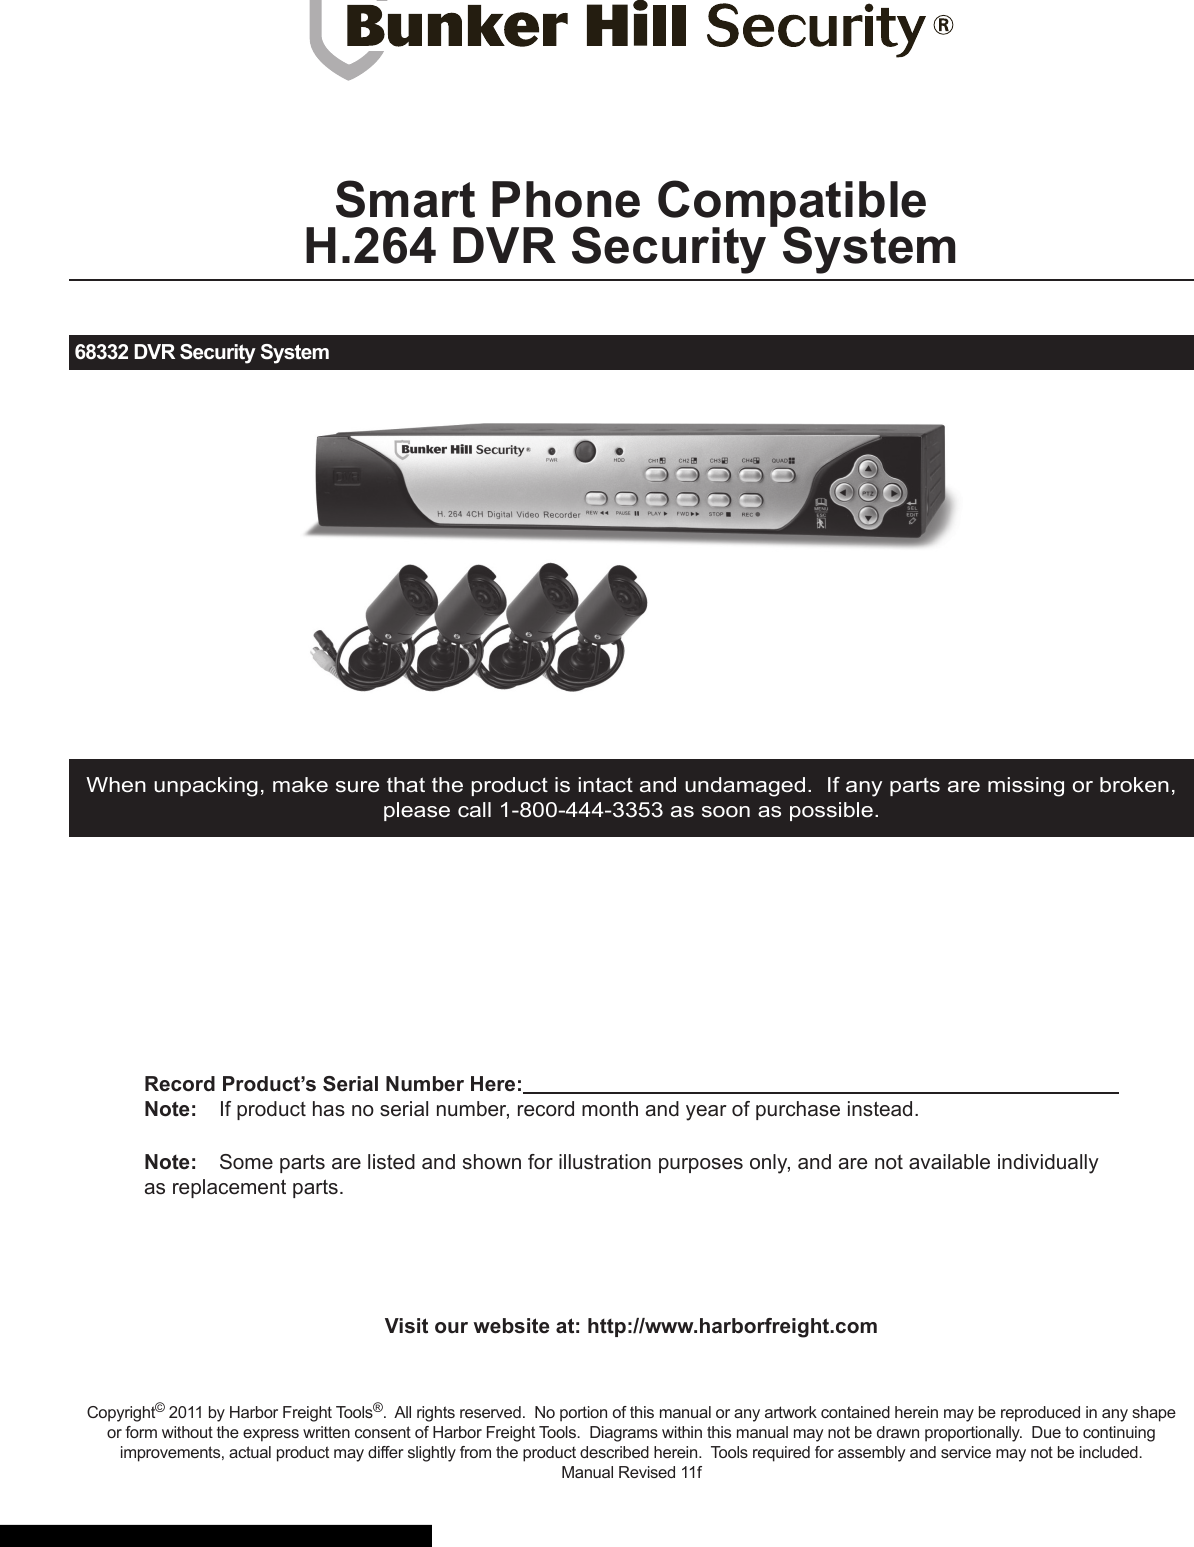 connect bunker hill security dvr to tv